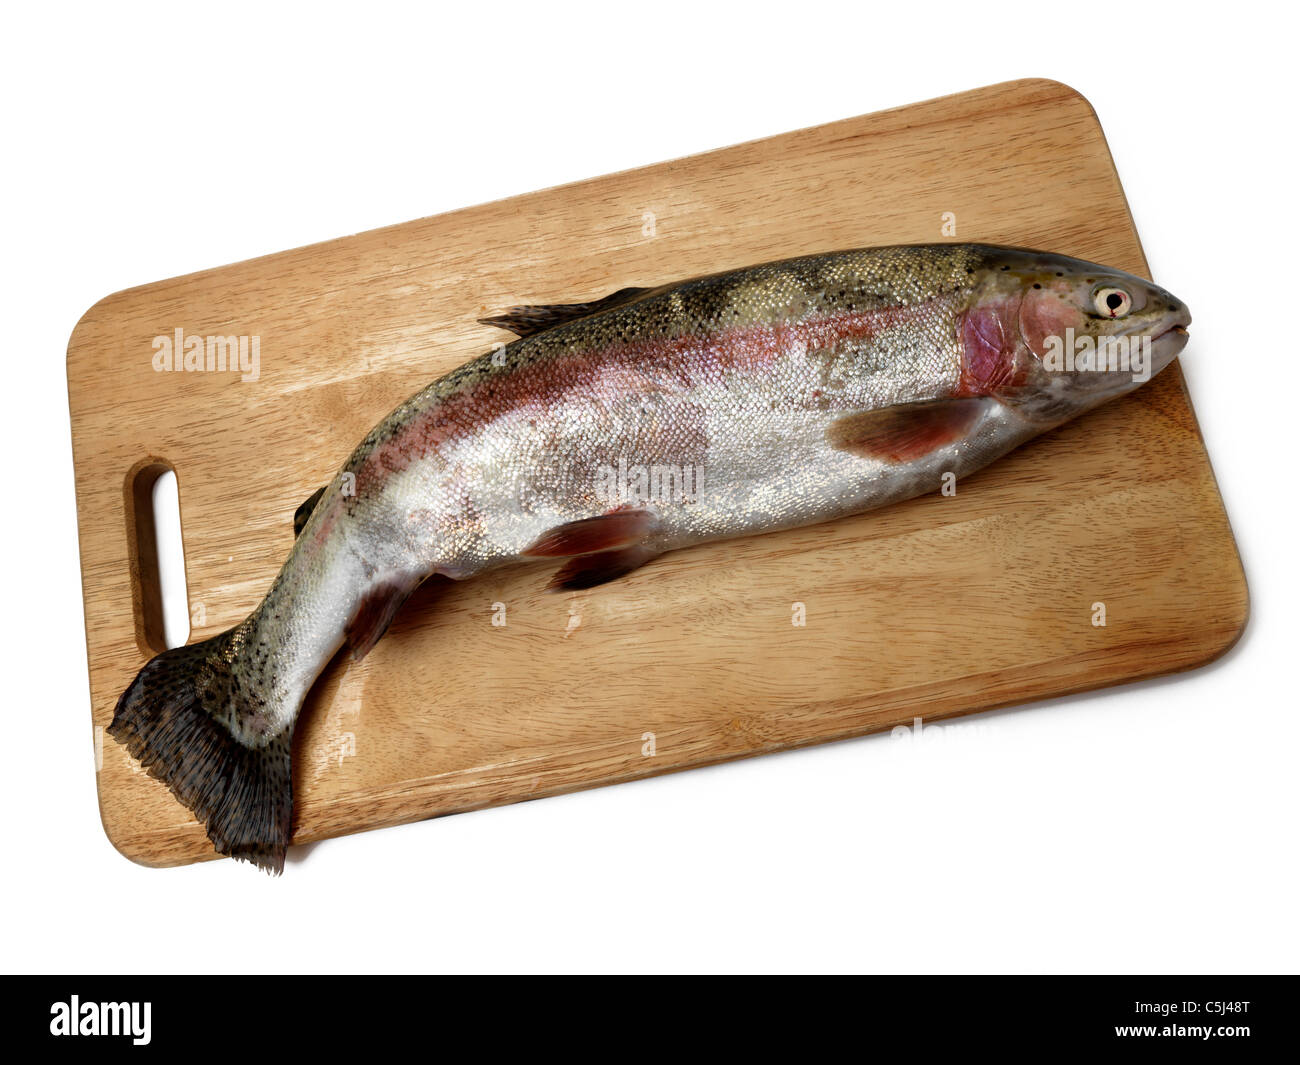 Colourful Trout On Wooden Chopping Board Stock Photo